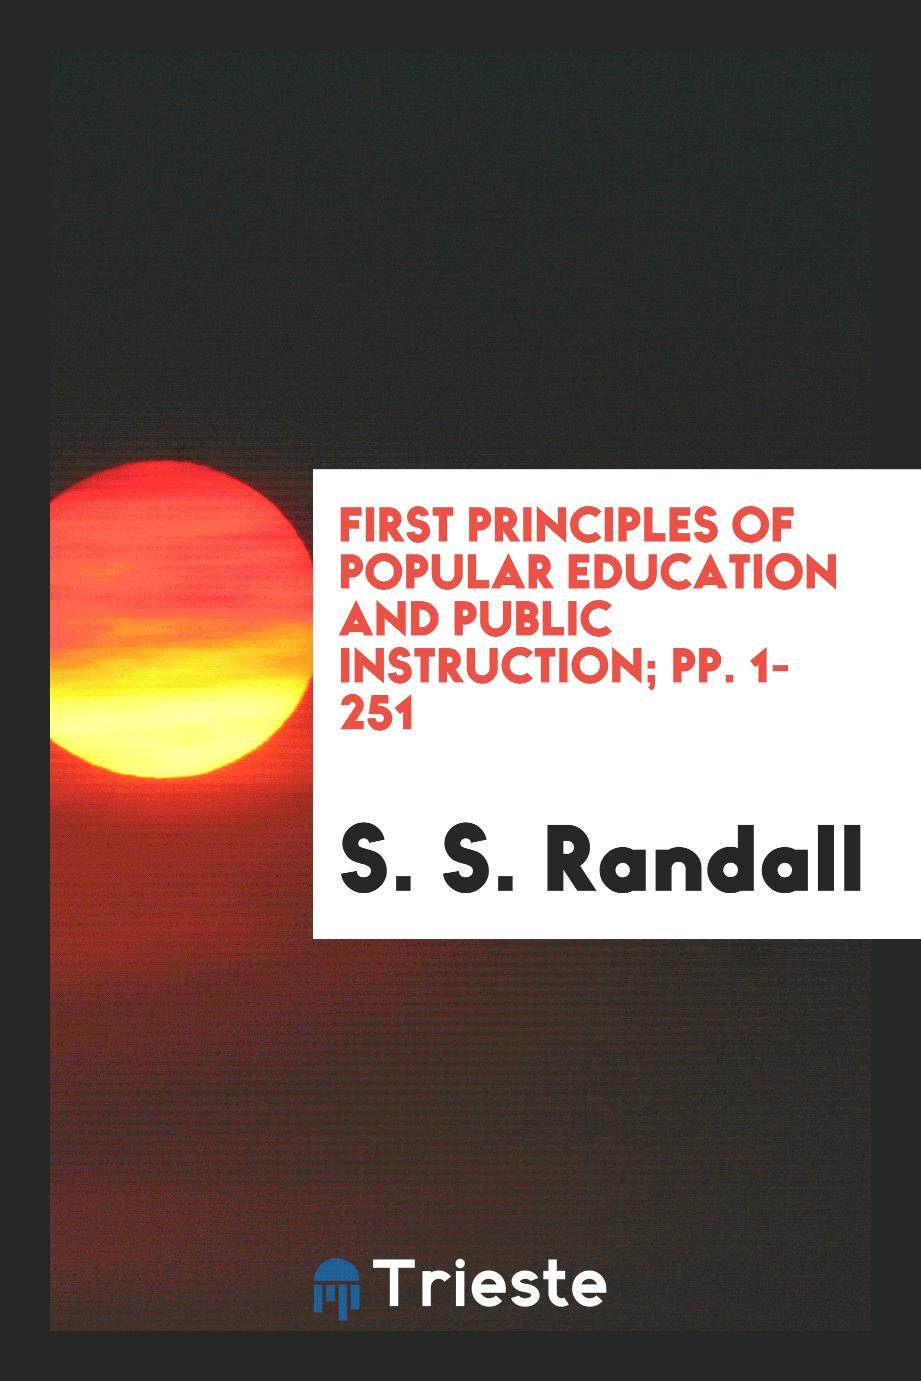 First Principles of Popular Education and Public Instruction; pp. 1-251